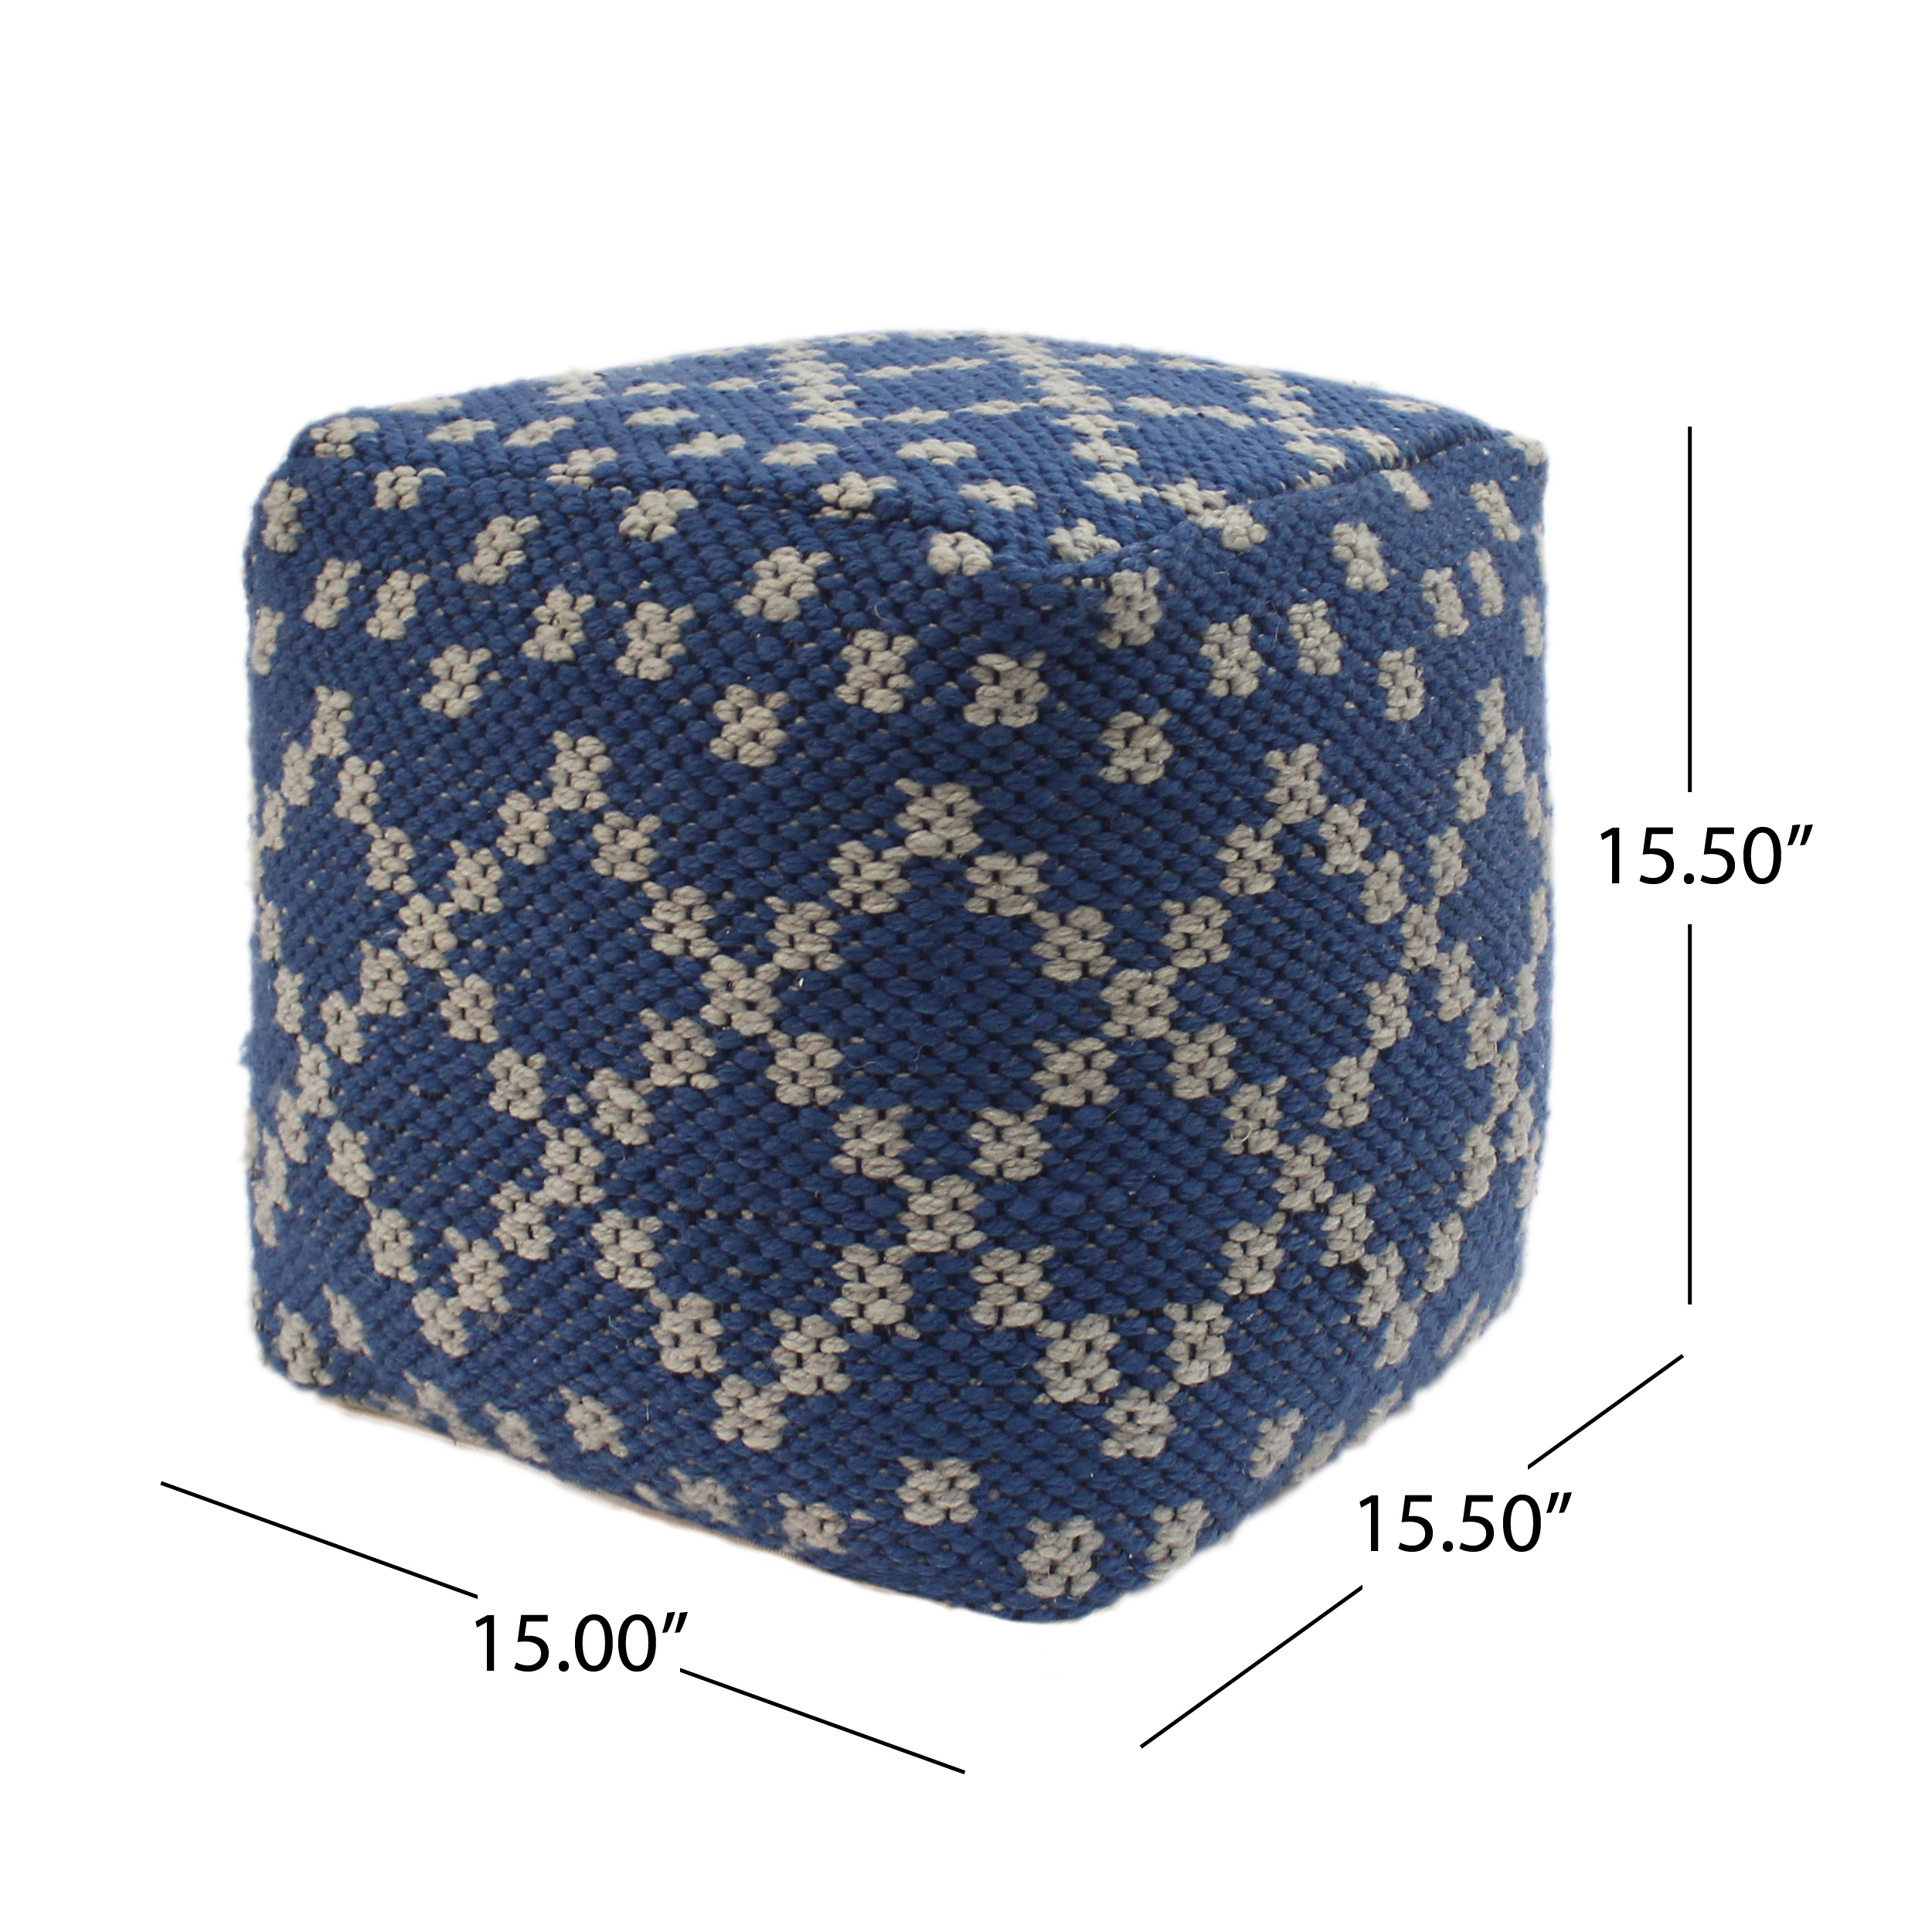 Ophelia Outdoor Handcrafted Boho Fabric Cube Pouf, Blue and White - image 4 of 6